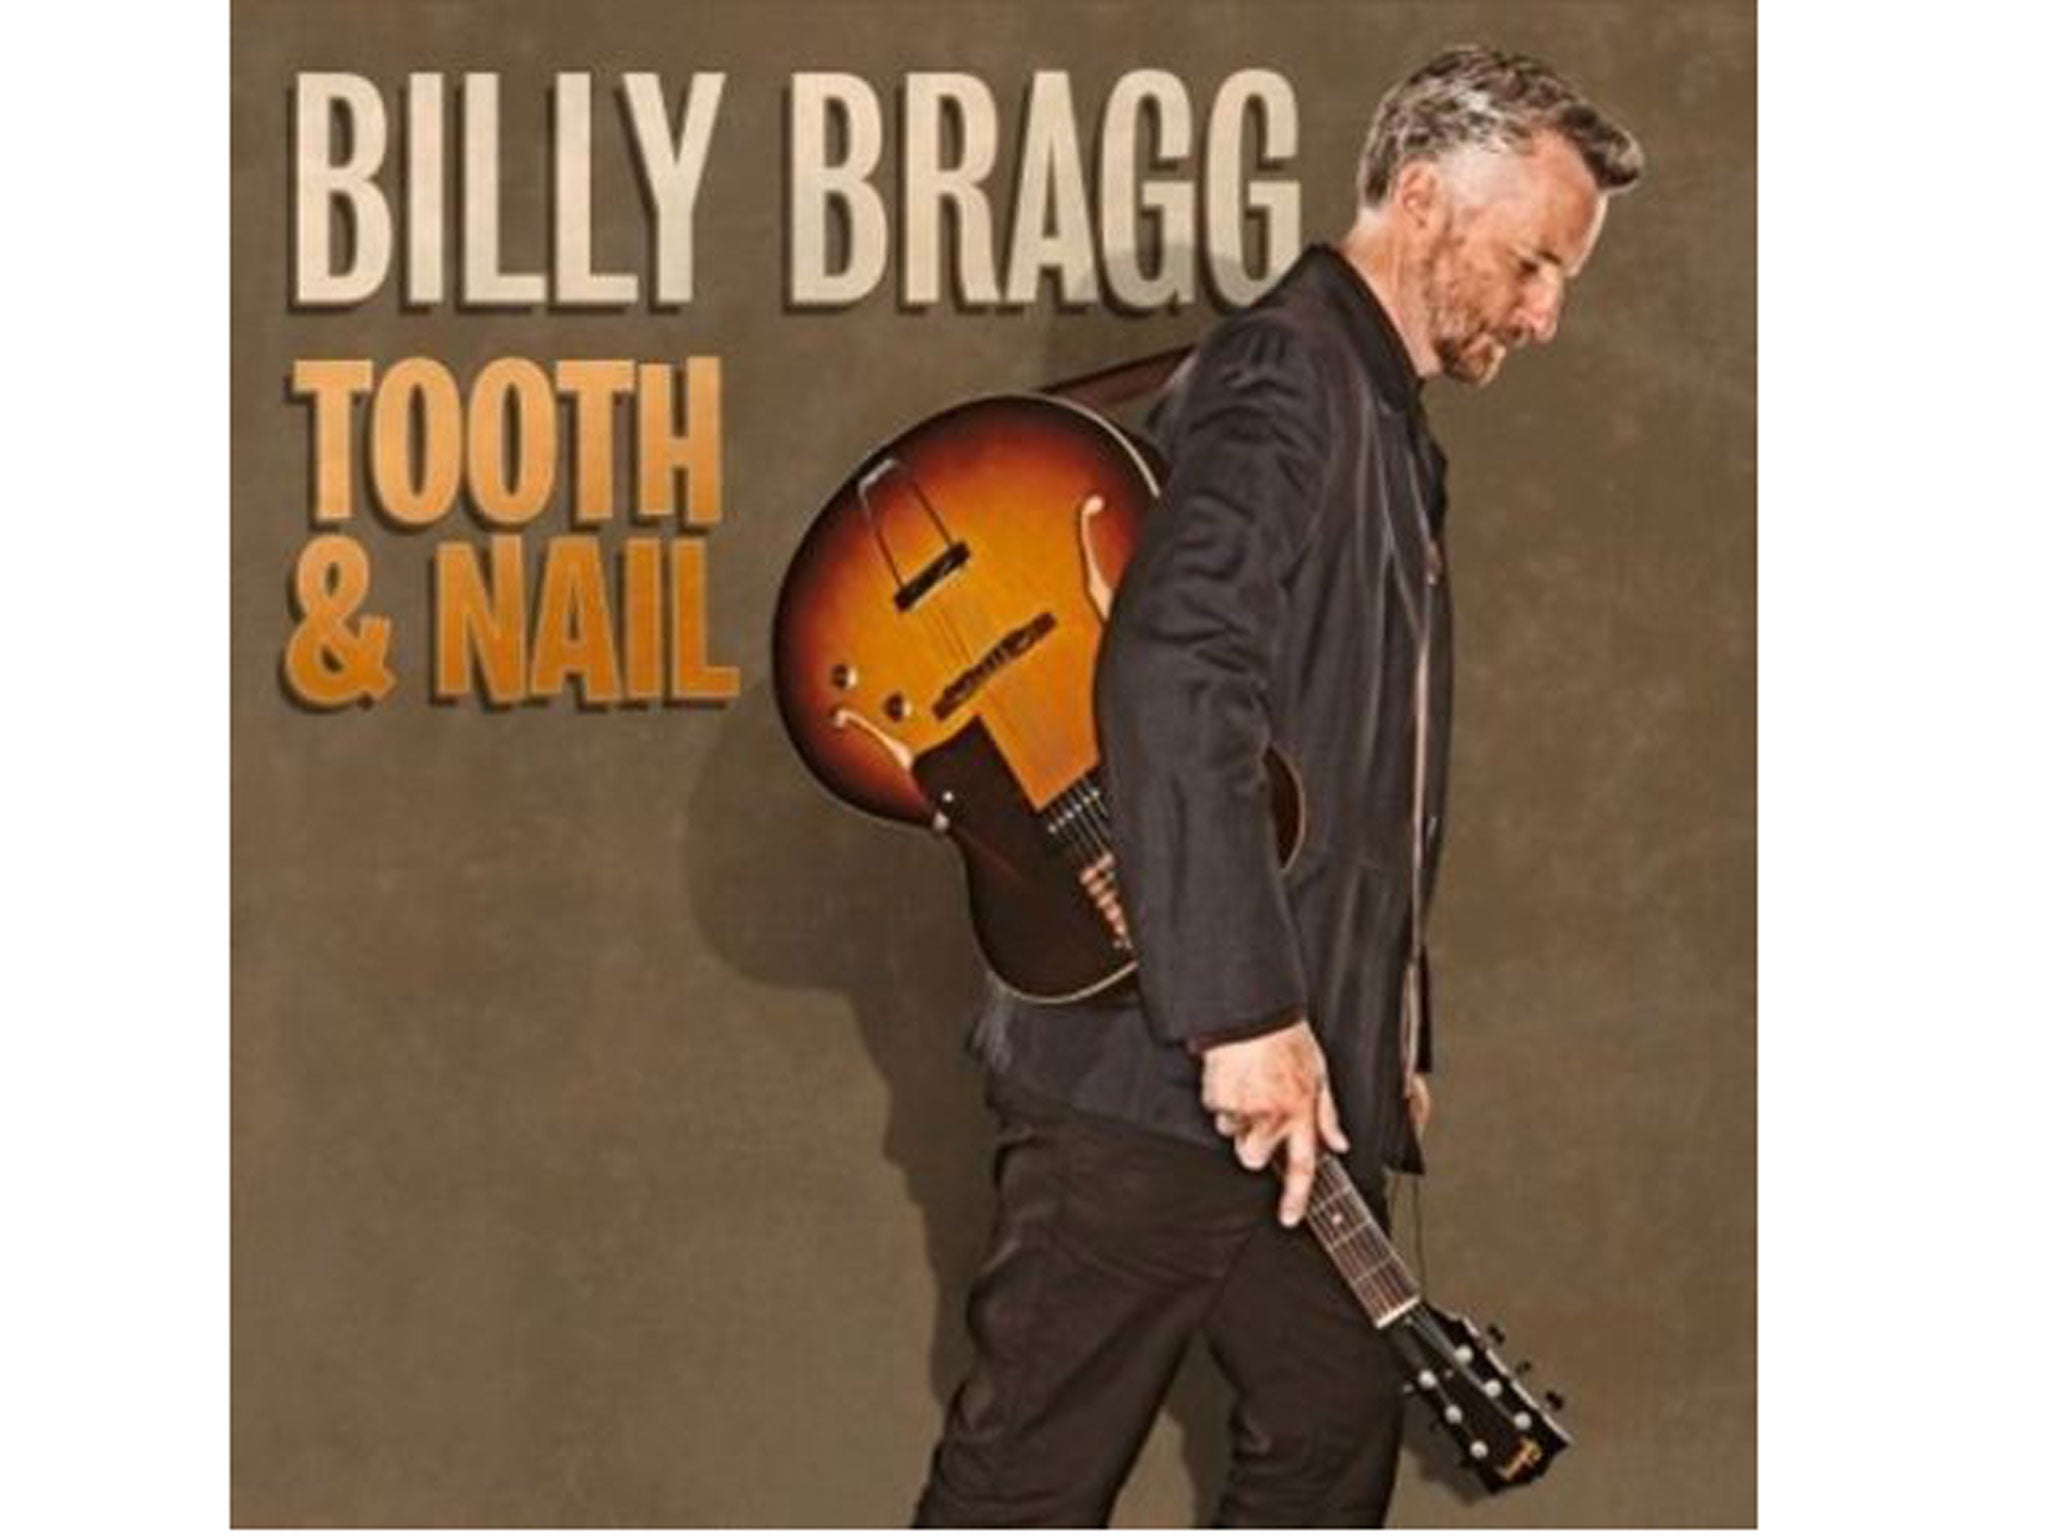 Billy Bragg, Tooth & Nail (Cooking Vinyl)